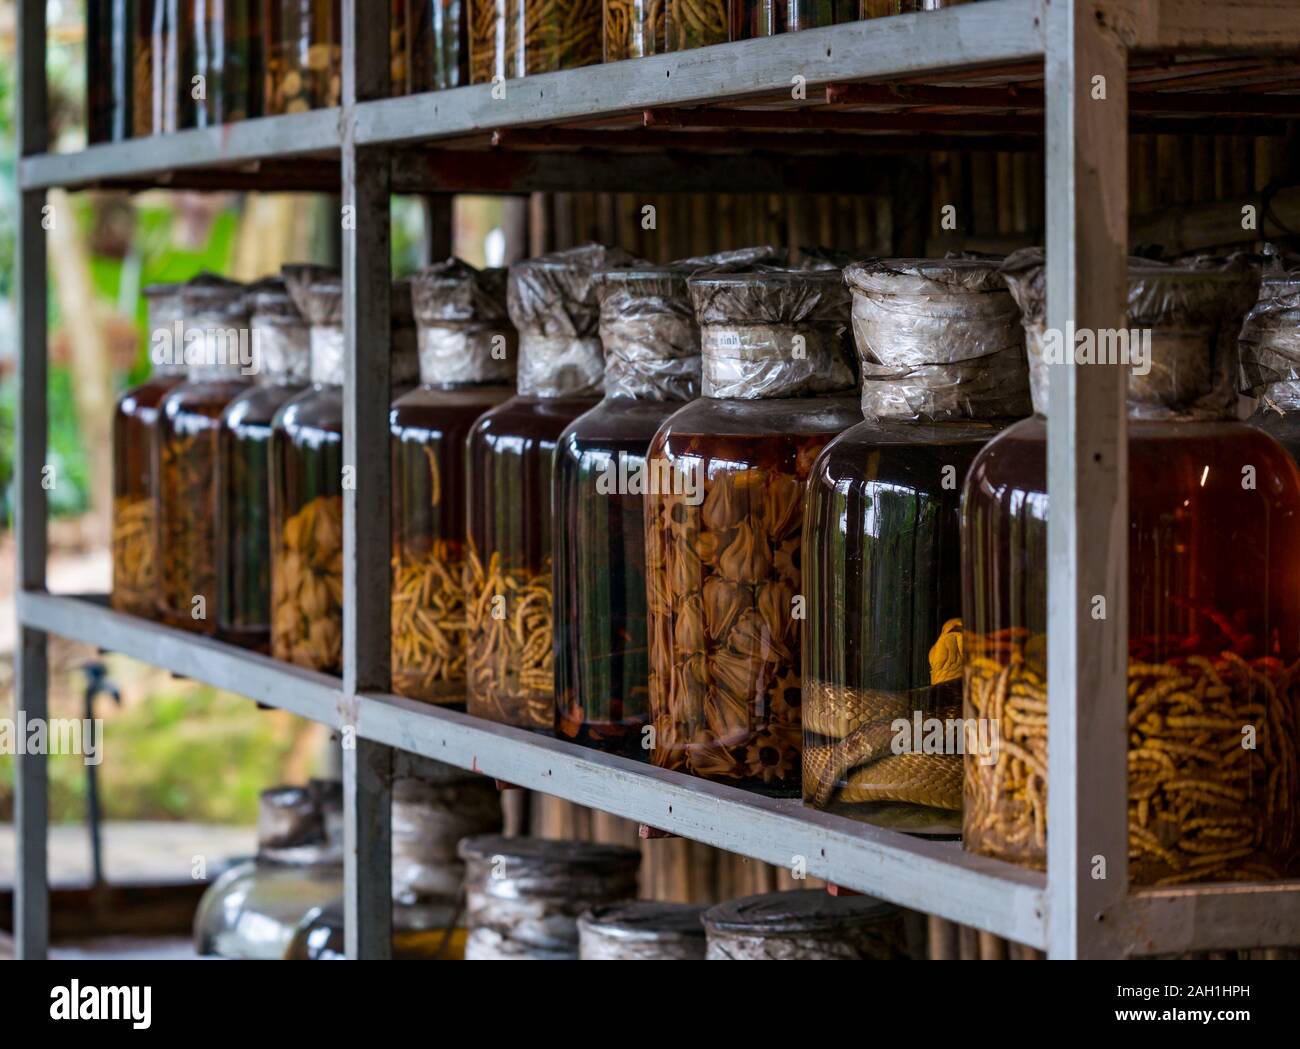 Traditional medicinal remedies with pickled preserved maggots & snake in glass jars, Thai Hai ethnic village, Thai Nguyen province, Vietnam, Asia Stock Photo